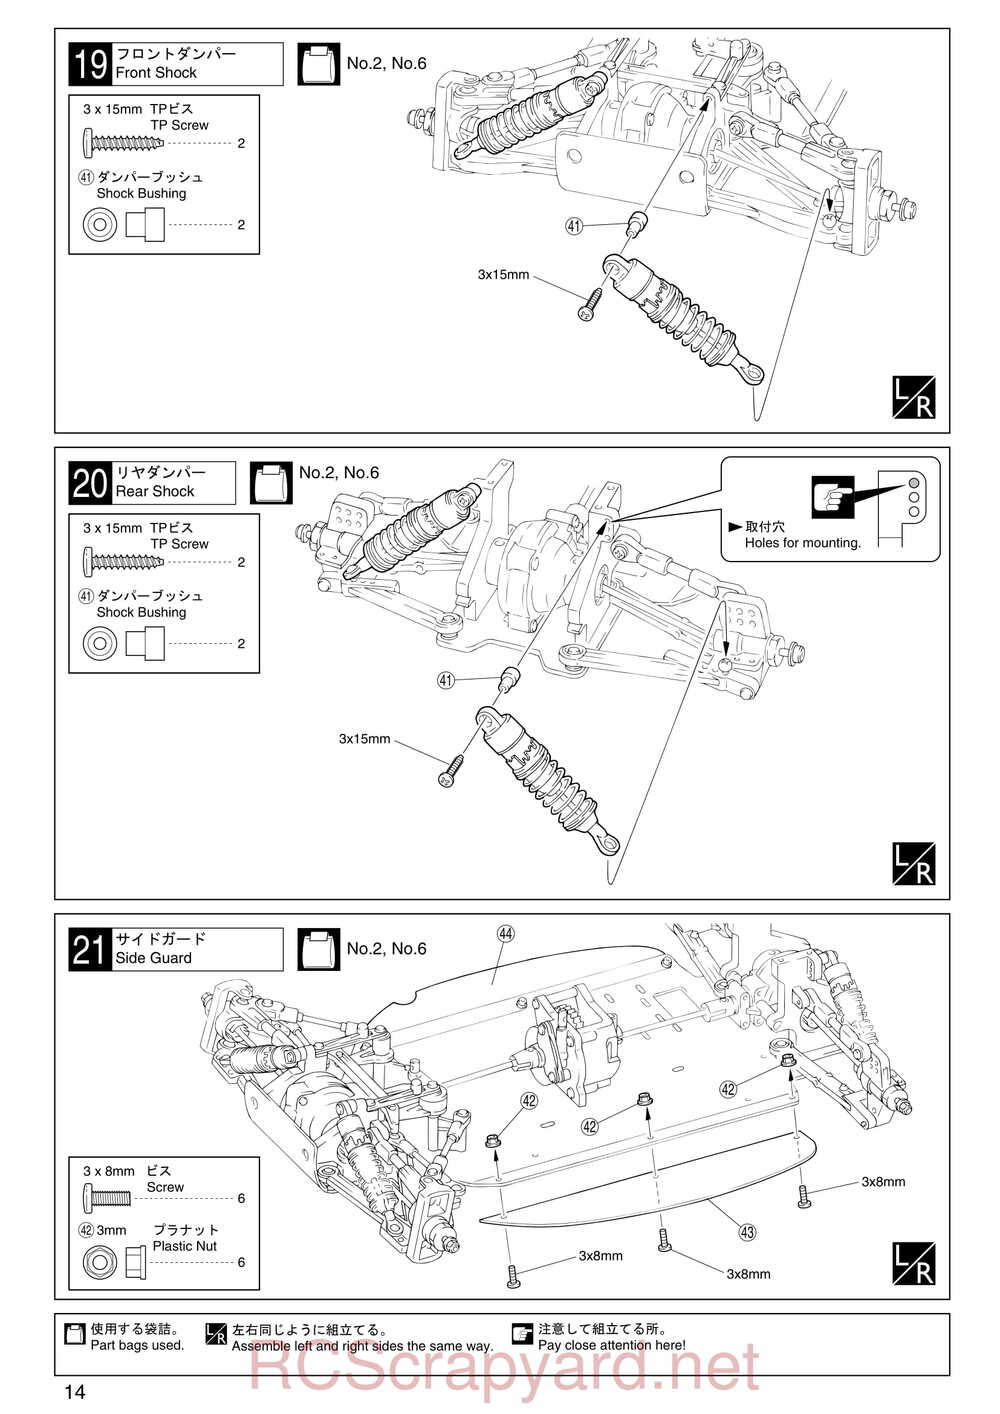 Kyosho - 31091 - Inferno-TR15 - Manual - Page 14